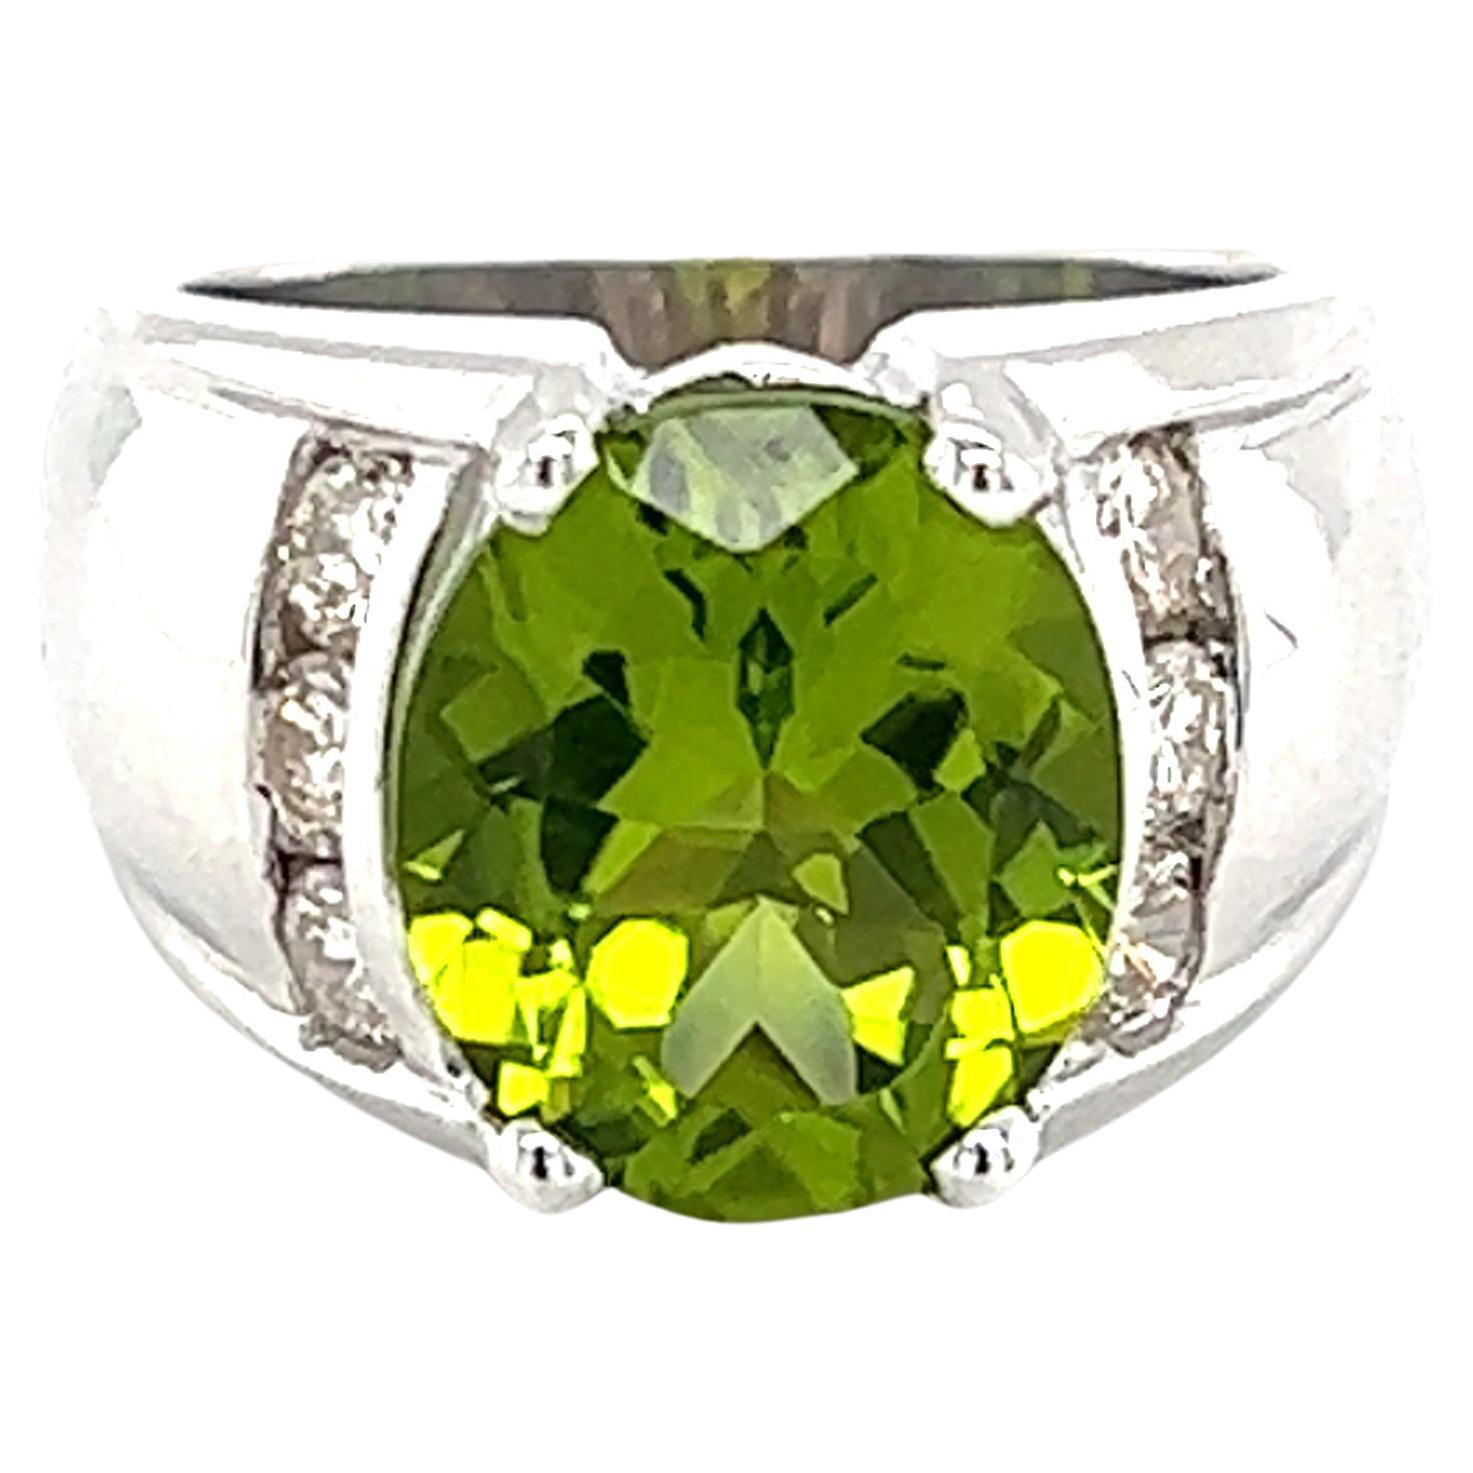 4.90 Carat Oval Peridot and Diamond Ring in 14K Gold